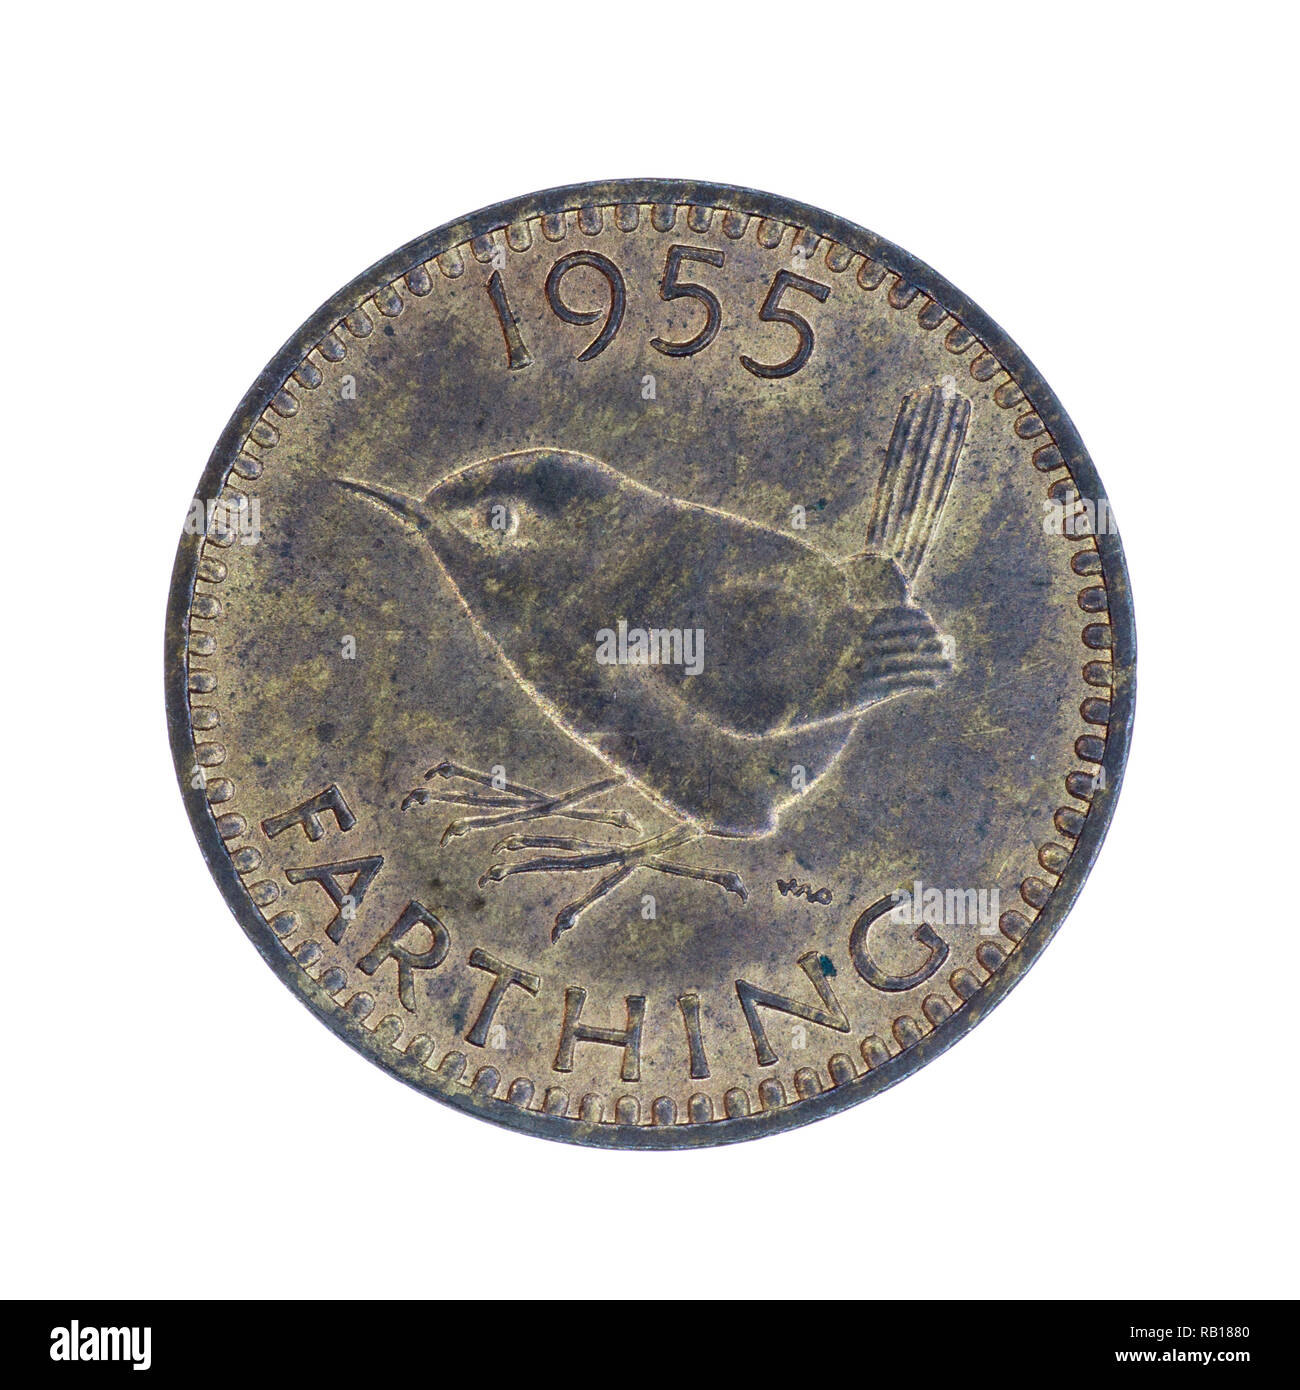 1955 British Farthing (quarter of a Penny) coin Stock Photo